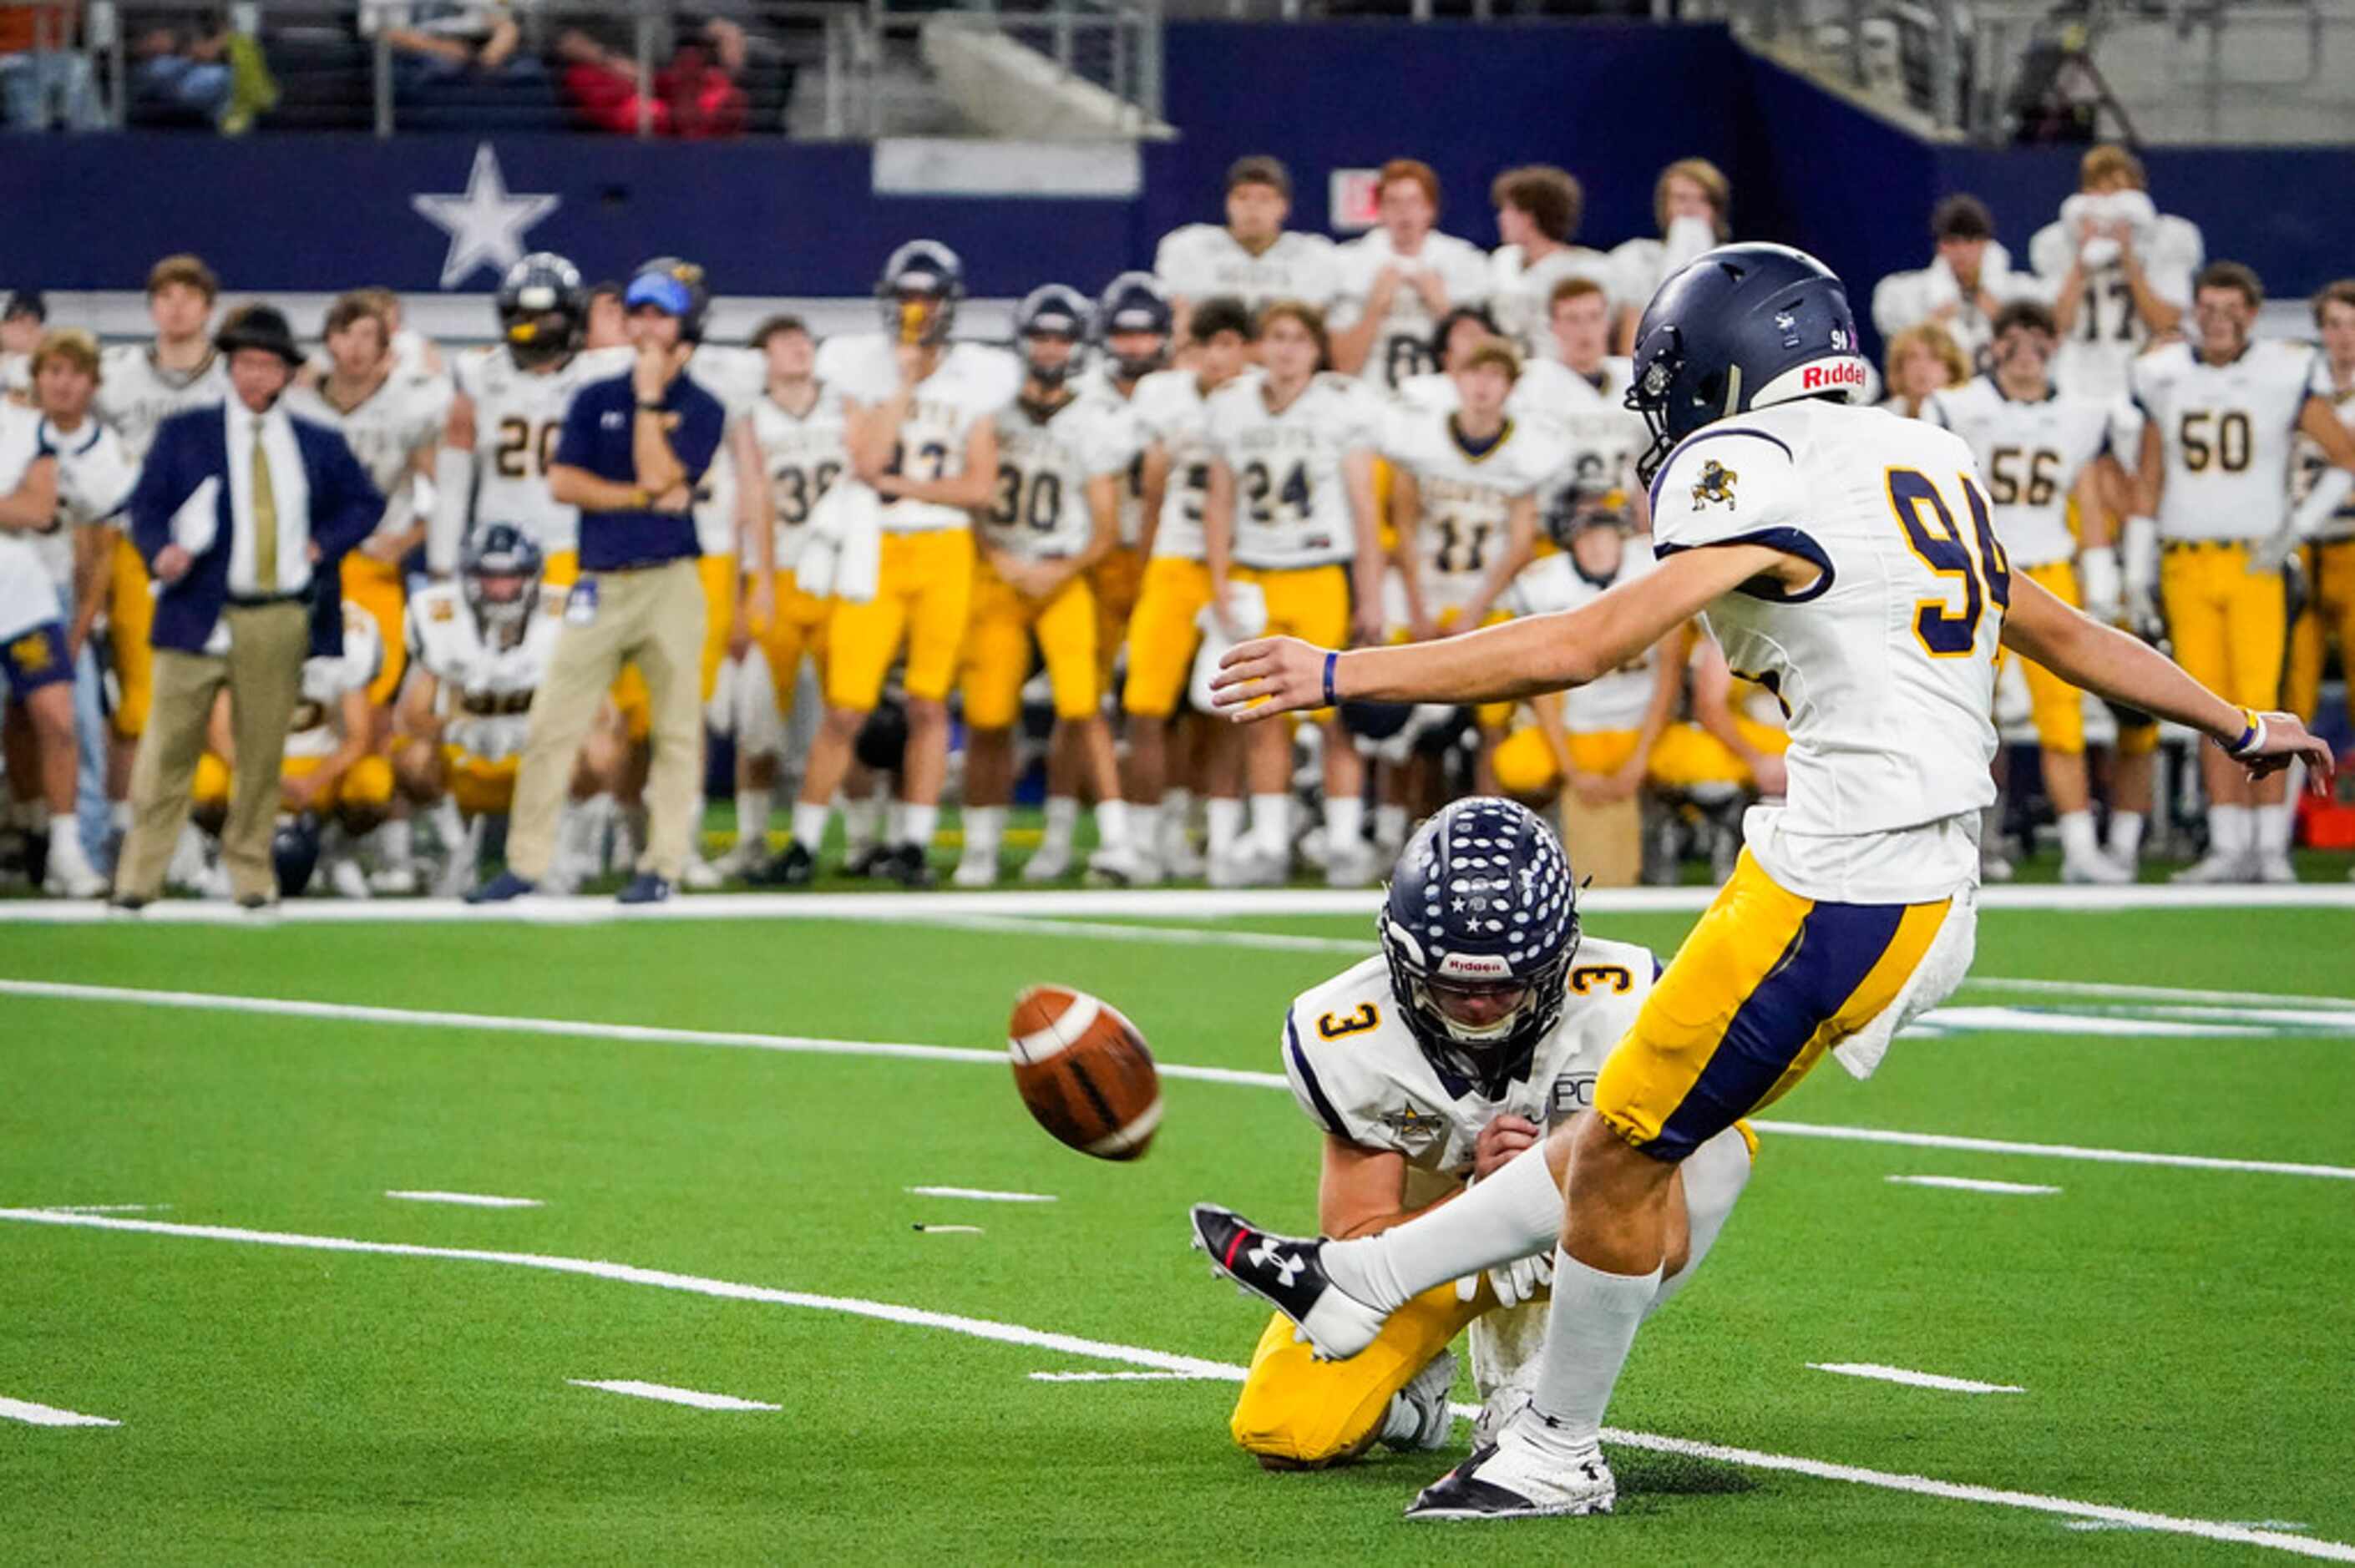 Highland Park kicker Wesley Winters hits 39-yard field goal in the final minute to force...